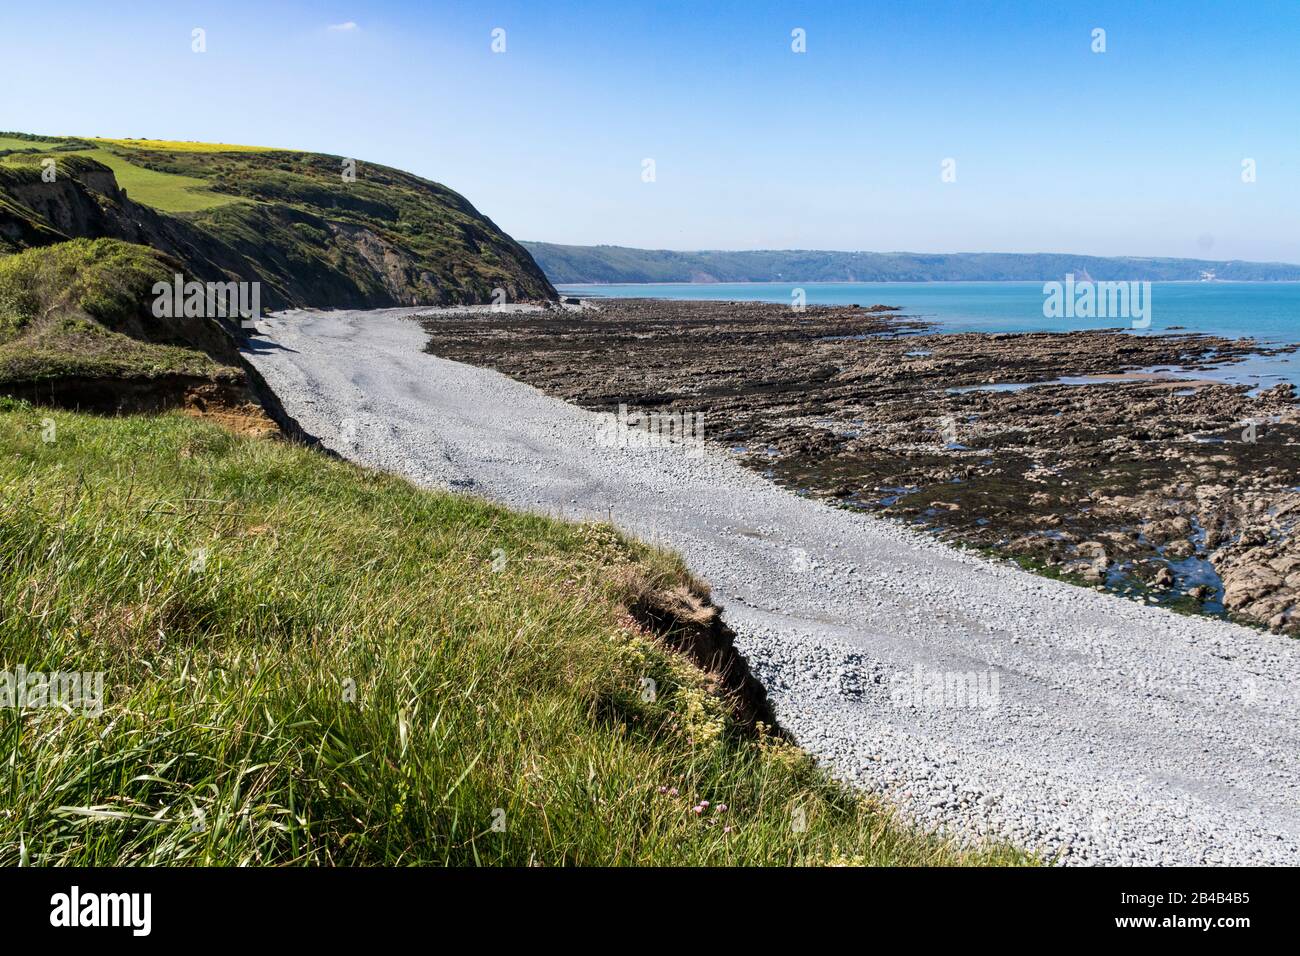 Scenic View of Greencliff Beach and Coastal View-Looking Towards Bucks Mills and Clovelly at Low Tide from the South West Footpath : Greencliff Beach. Stock Photo